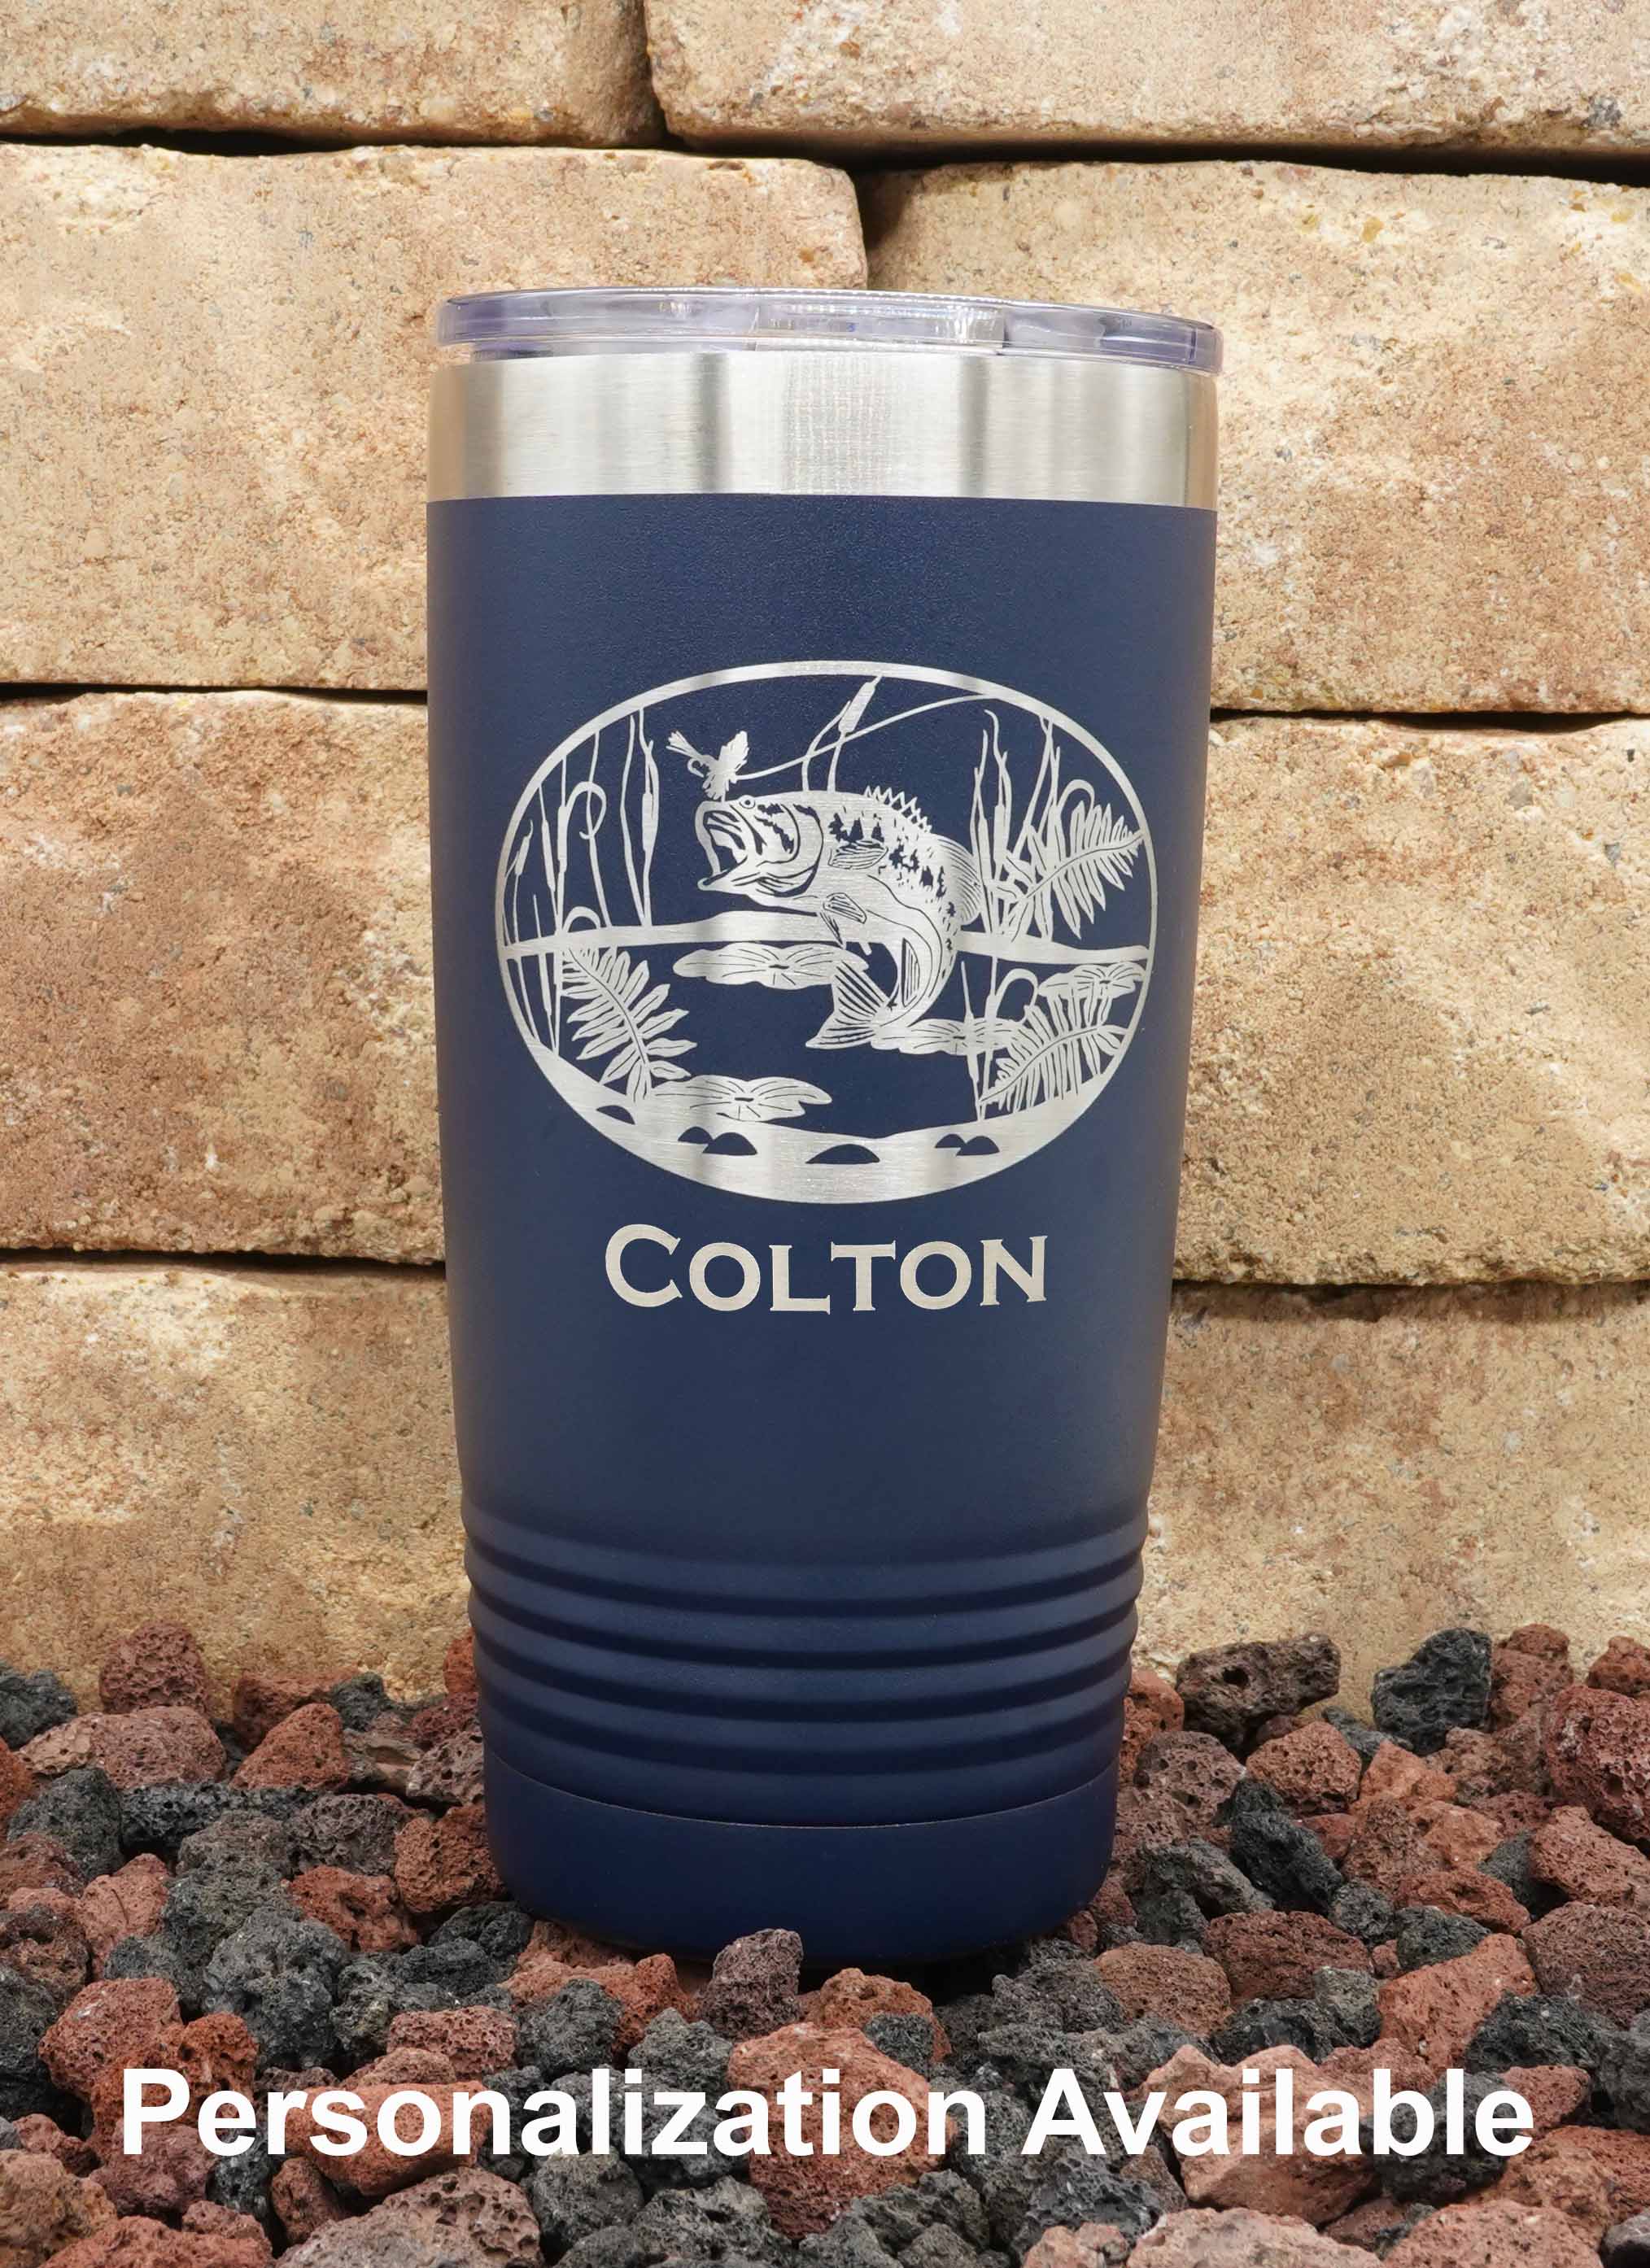 20oz Polar Camel laser engraved with bass fishing scene, shown with personalized name added.